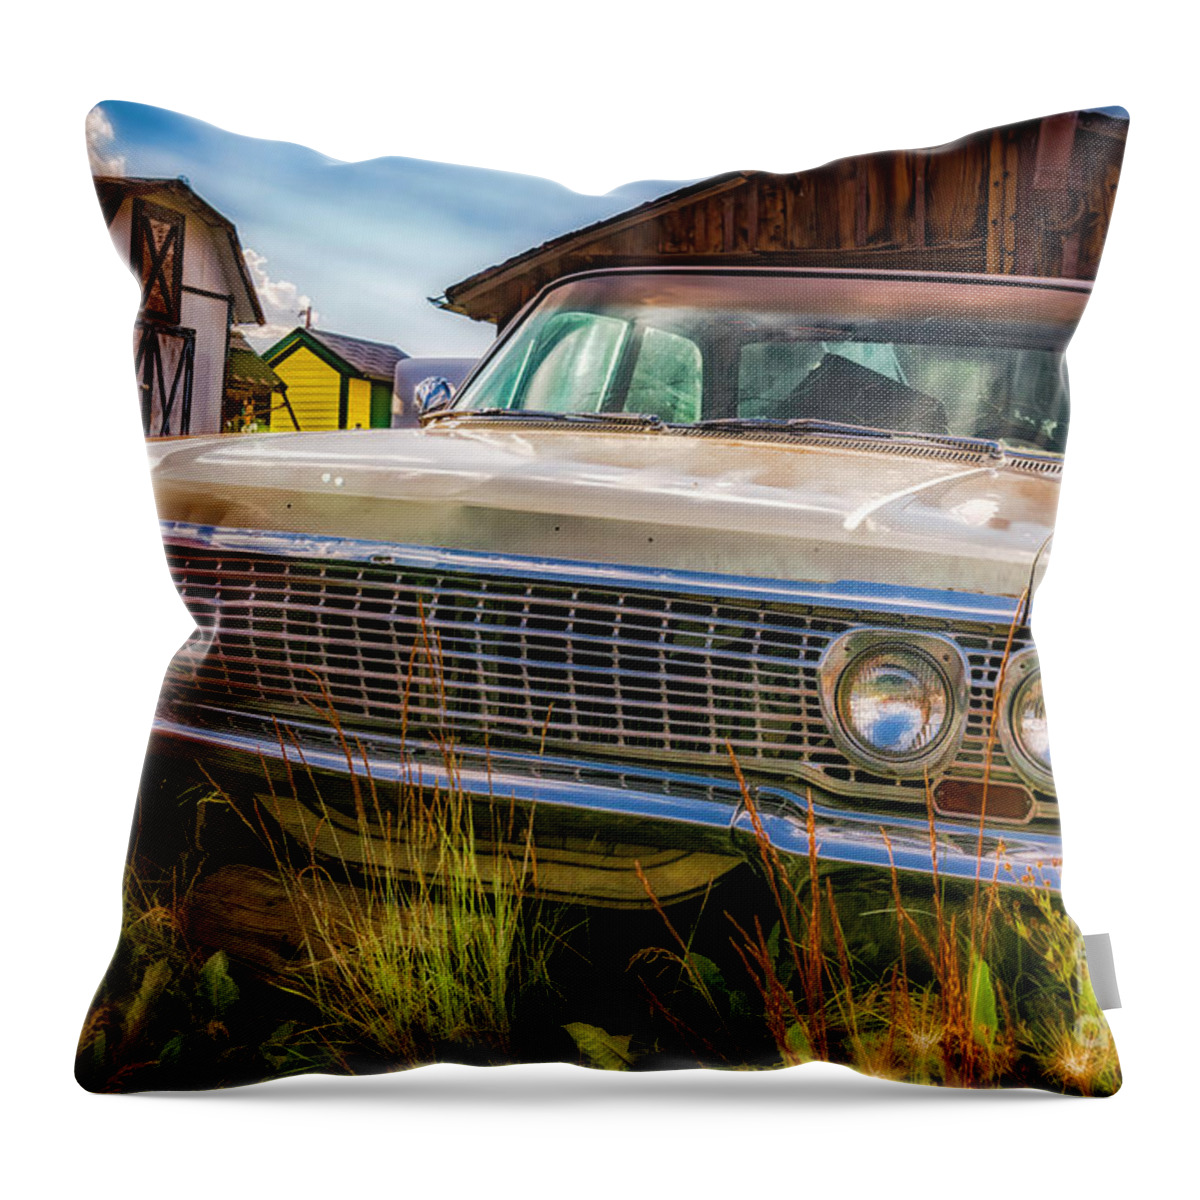 63 Impala Throw Pillow featuring the photograph 63 Impala by Bitter Buffalo Photography